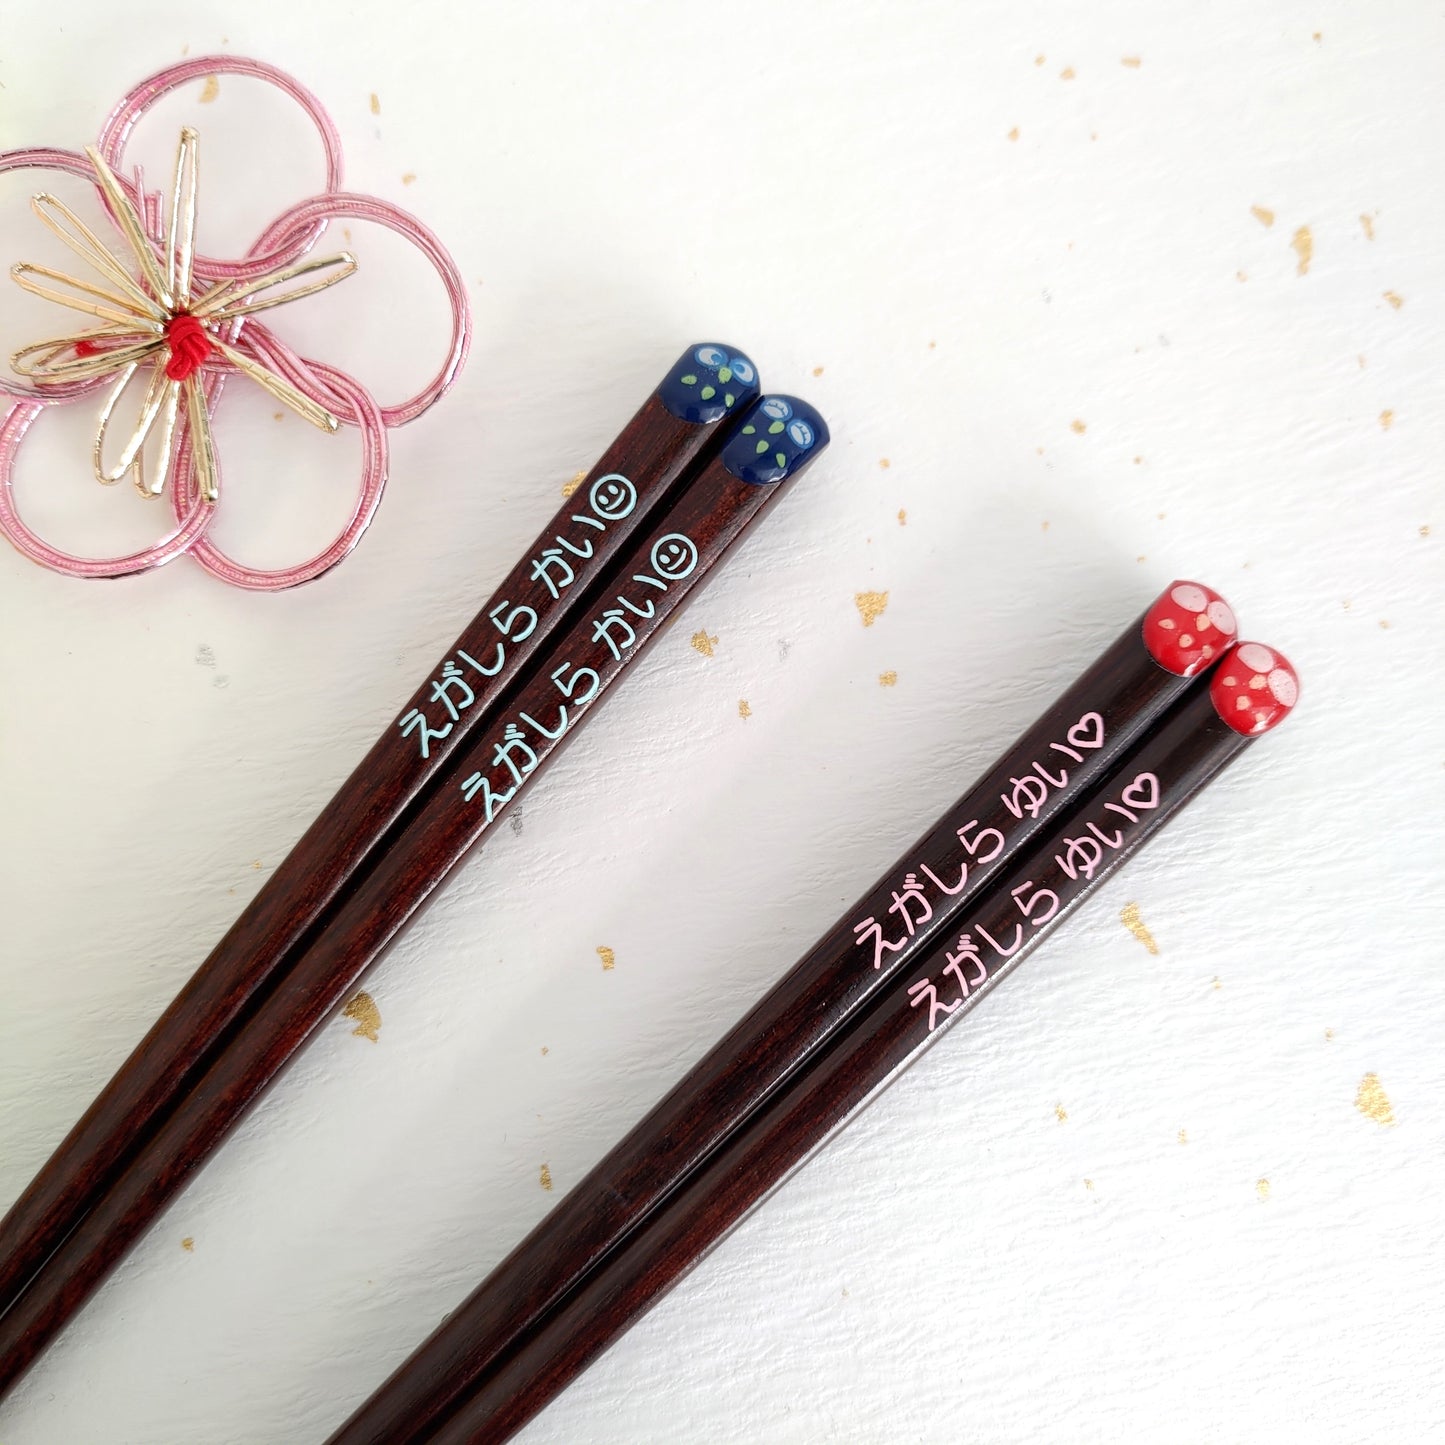 Kid's Lucky Owls Japanese chopsticks blue red - SINGLE PAIR WITH ENGRAVED WOODEN BOX SET